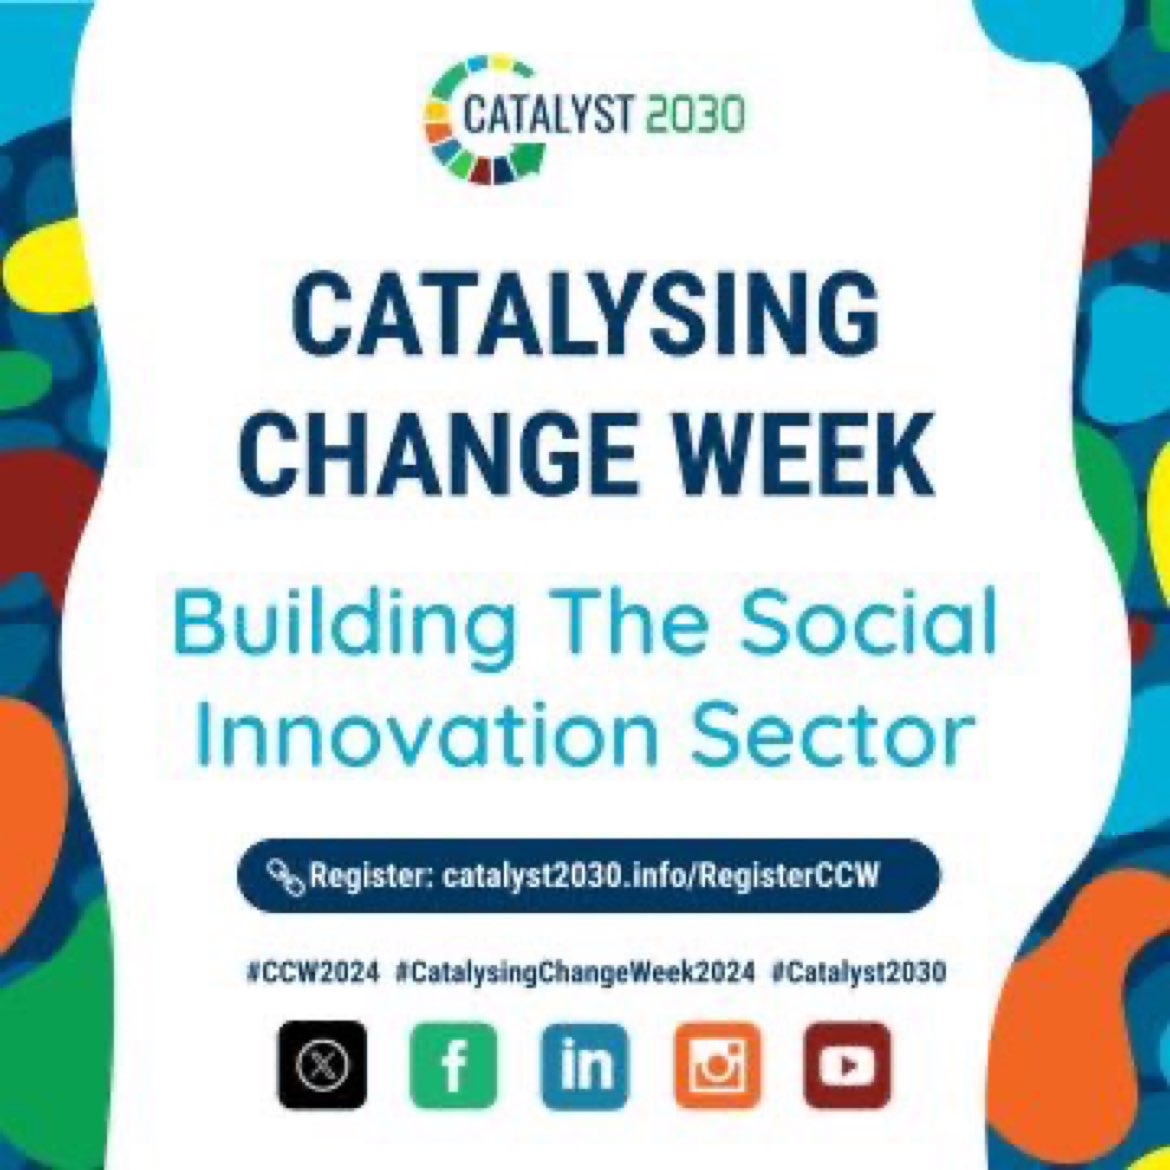 I am super excited for the 2025 Catalysing Change Week 💃! 

Don’t miss this opportunity. Register for the #Catalyst2030 event coming up next month via catalyst2030.info/RegisterCCW to interact with leading and informed leaders to help shape the future. Details below: 
📅 May 9-10,…